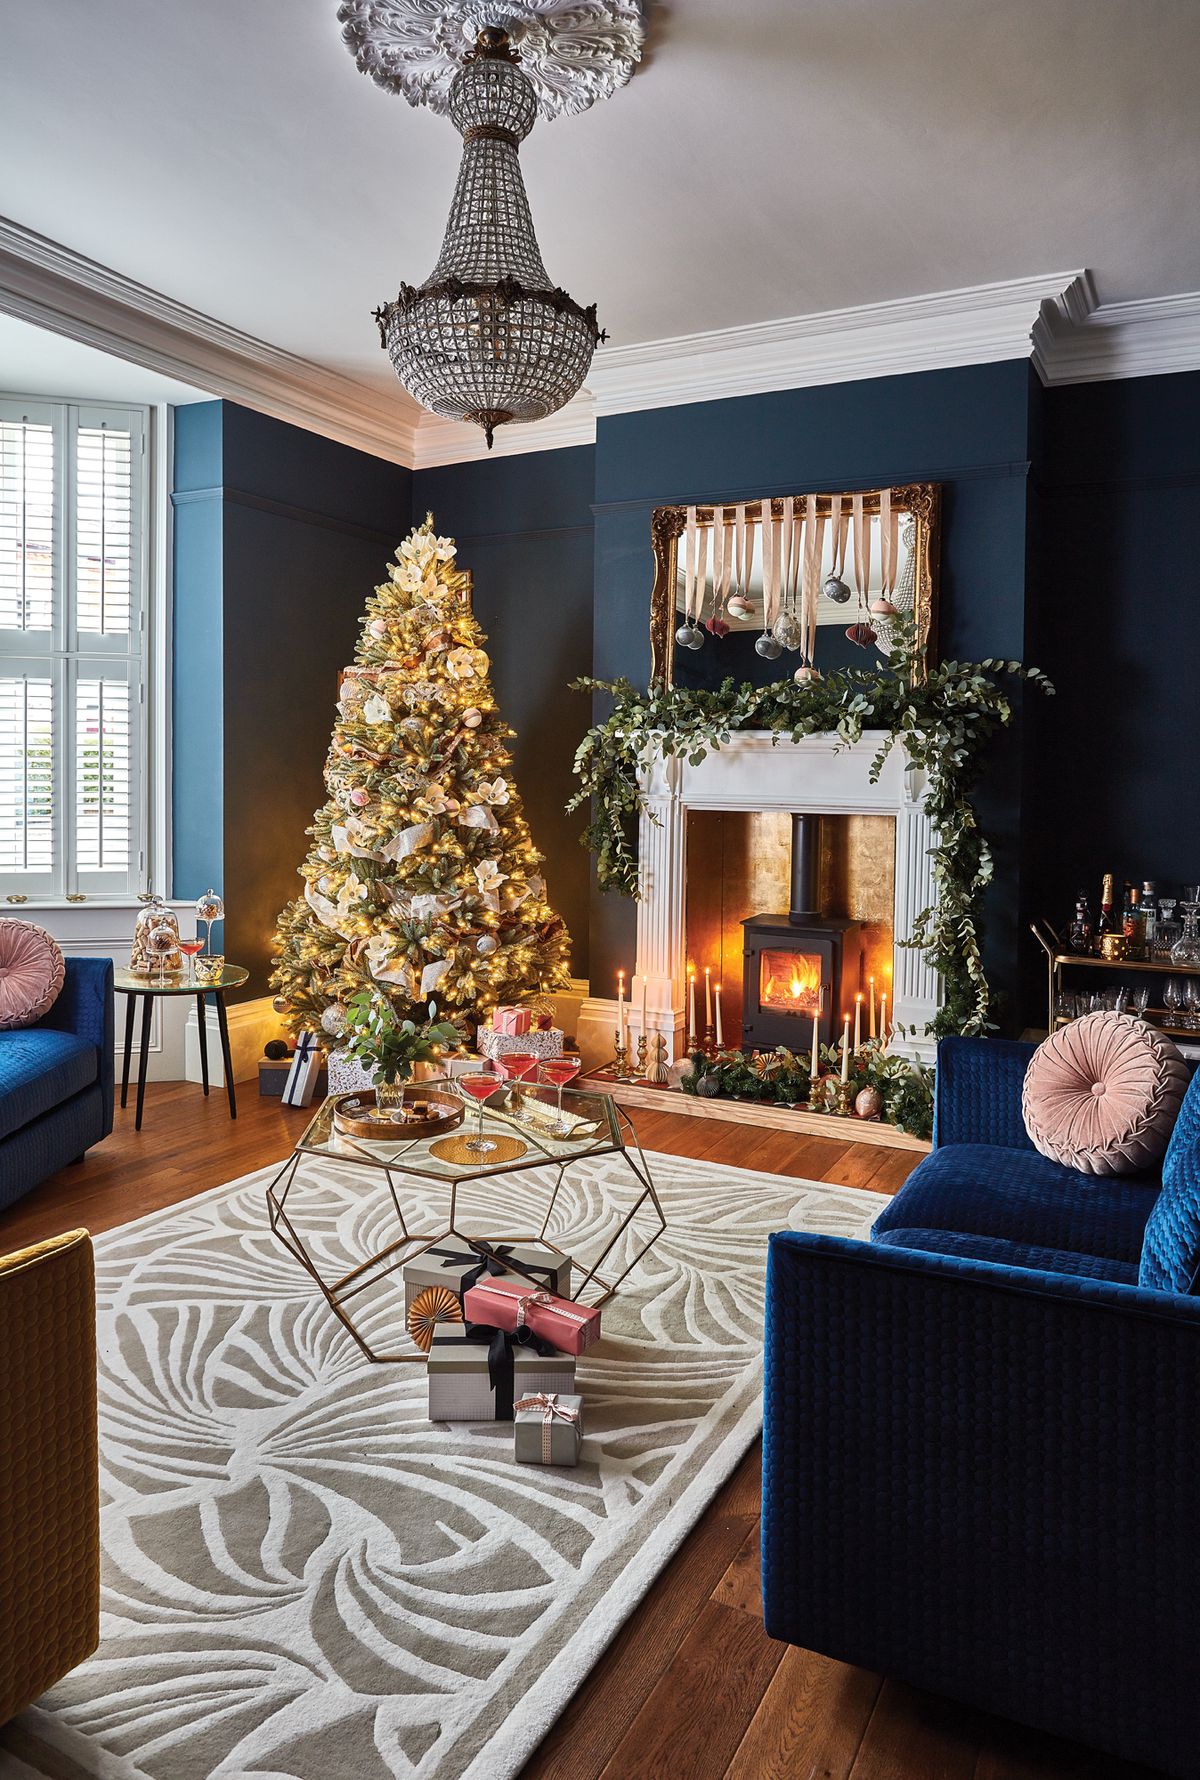 5 Christmas decor trends we're pinching from festive